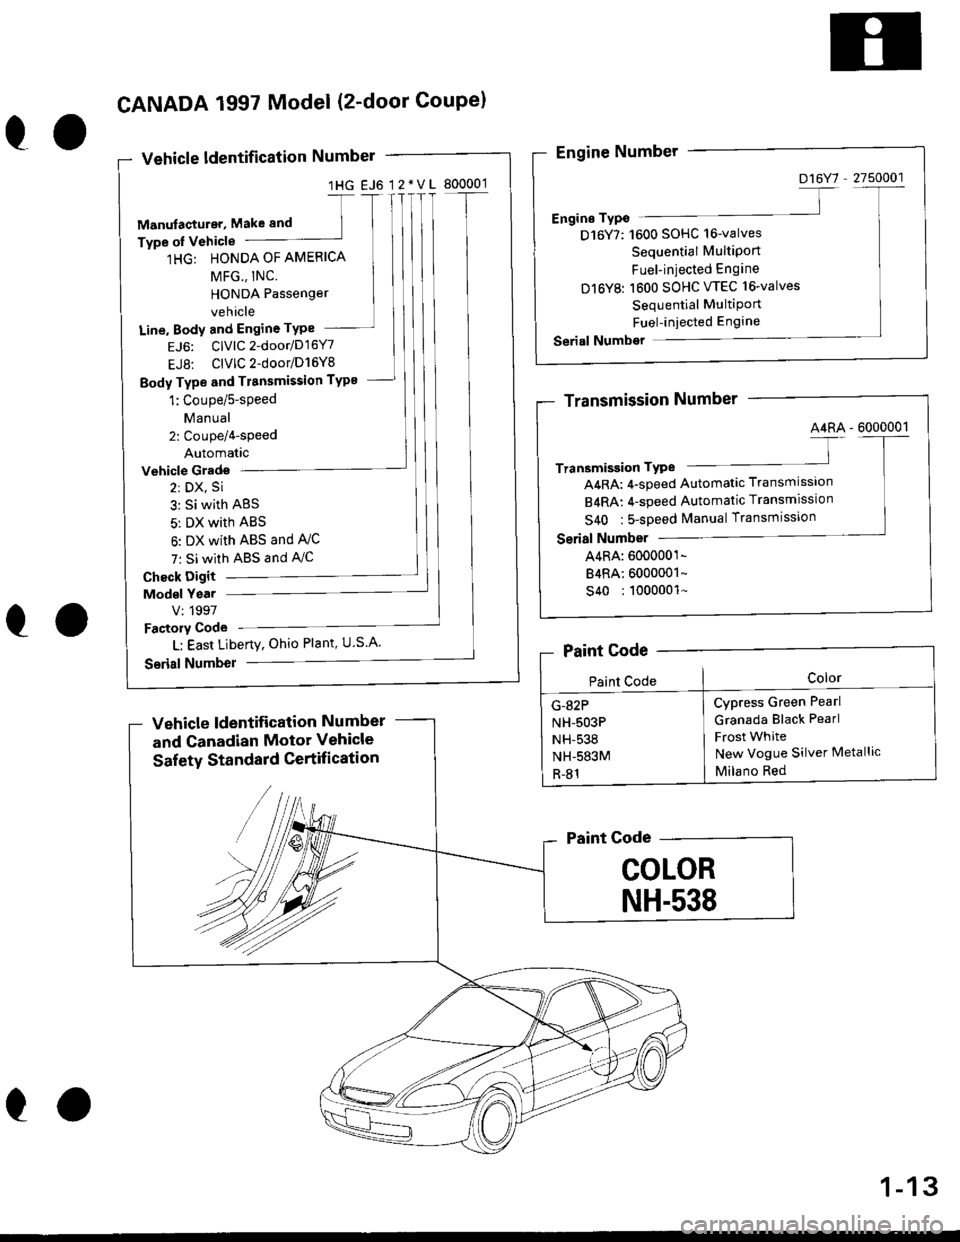 HONDA CIVIC 1996 6.G Workshop Manual 1HG EJ6 12*VL 800001
1HG: HONDA OF AMERICA
Line, Body and Engine TYPe
EJ6: ClvlC2-door/D16Y7
EJ8: ClVlC2-door/D16Y8
Body Type and Tr8nsmission TYP8
Vehicle Grado
2: DX, Si
3: Si with ABS
5: DX with AB